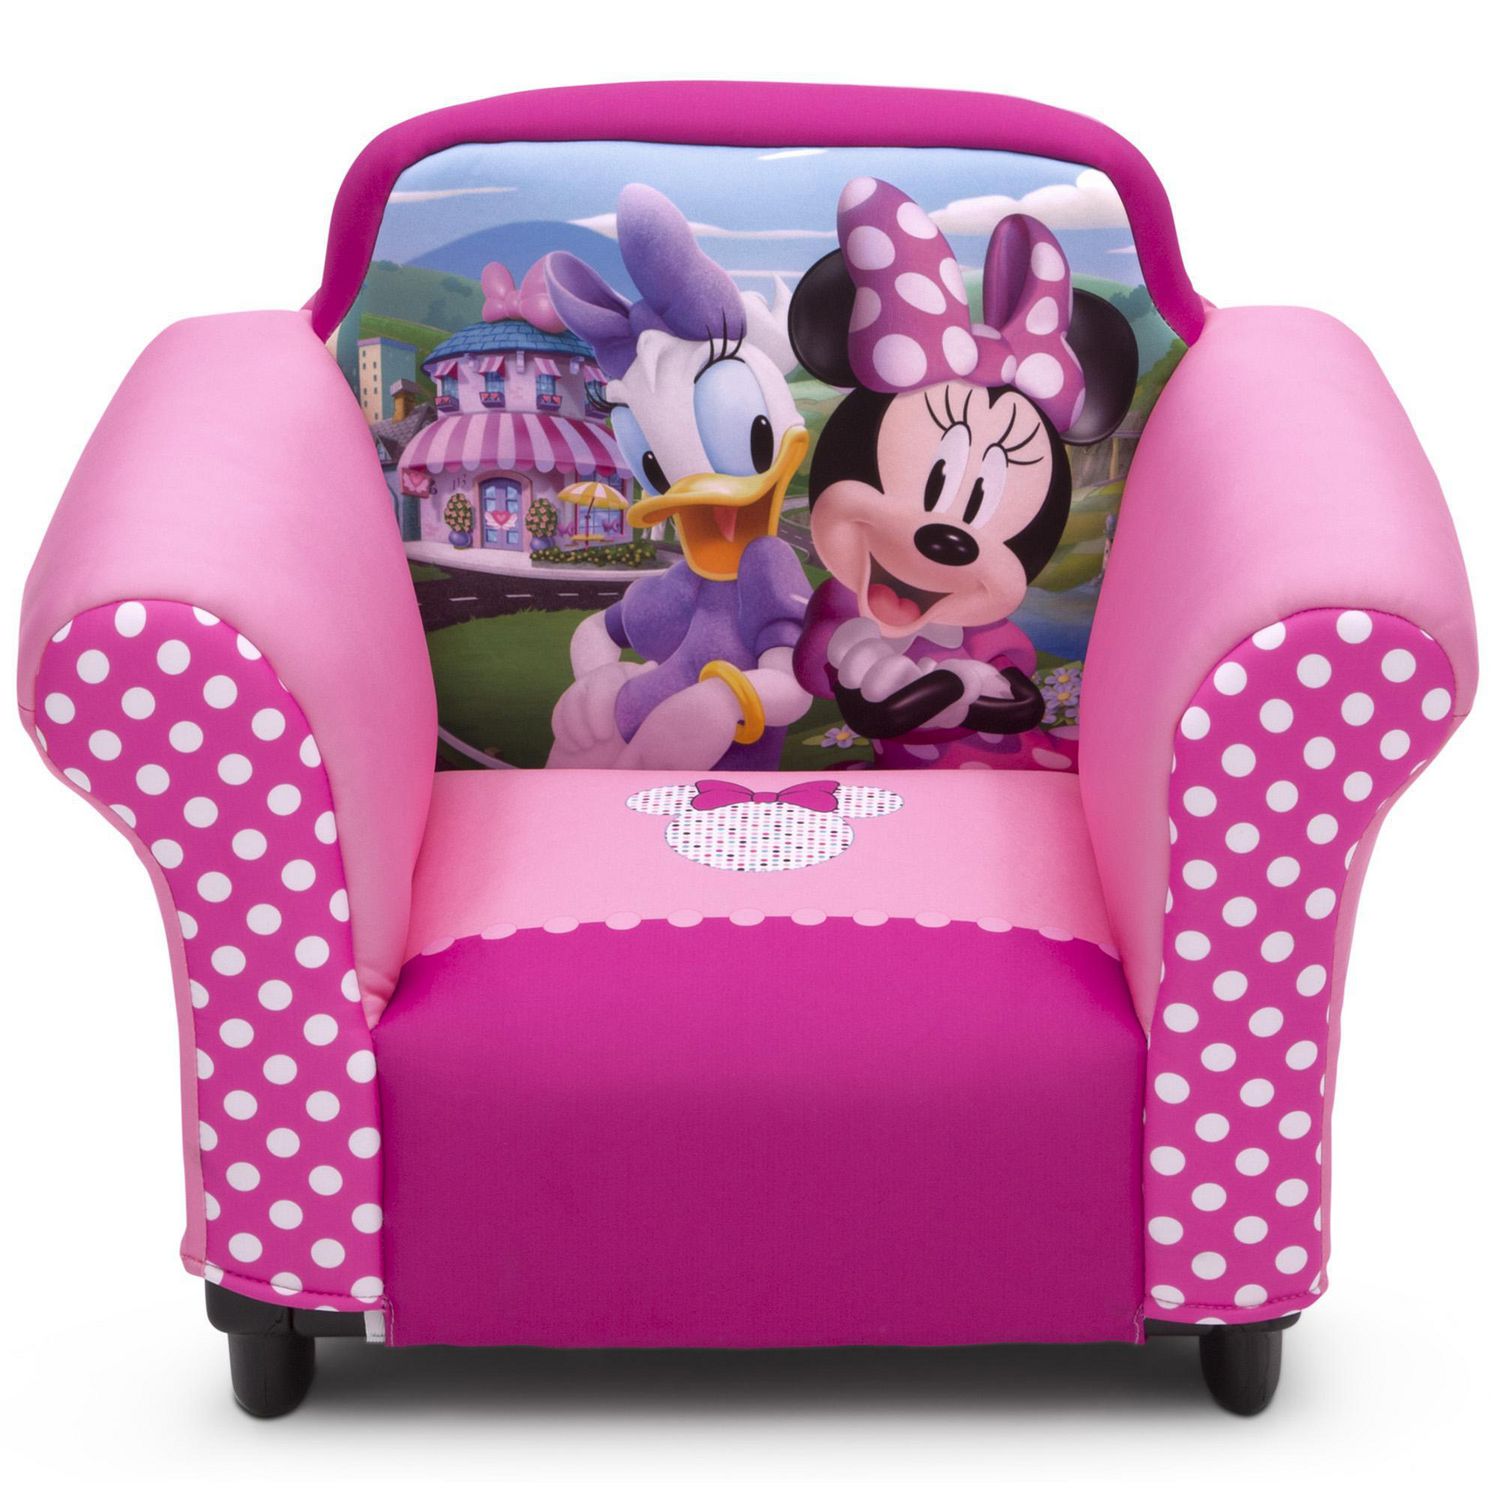 Disney Minnie Mouse Kids Upholstered, Minnie Mouse Upholstered Chair With Ottoman Storage